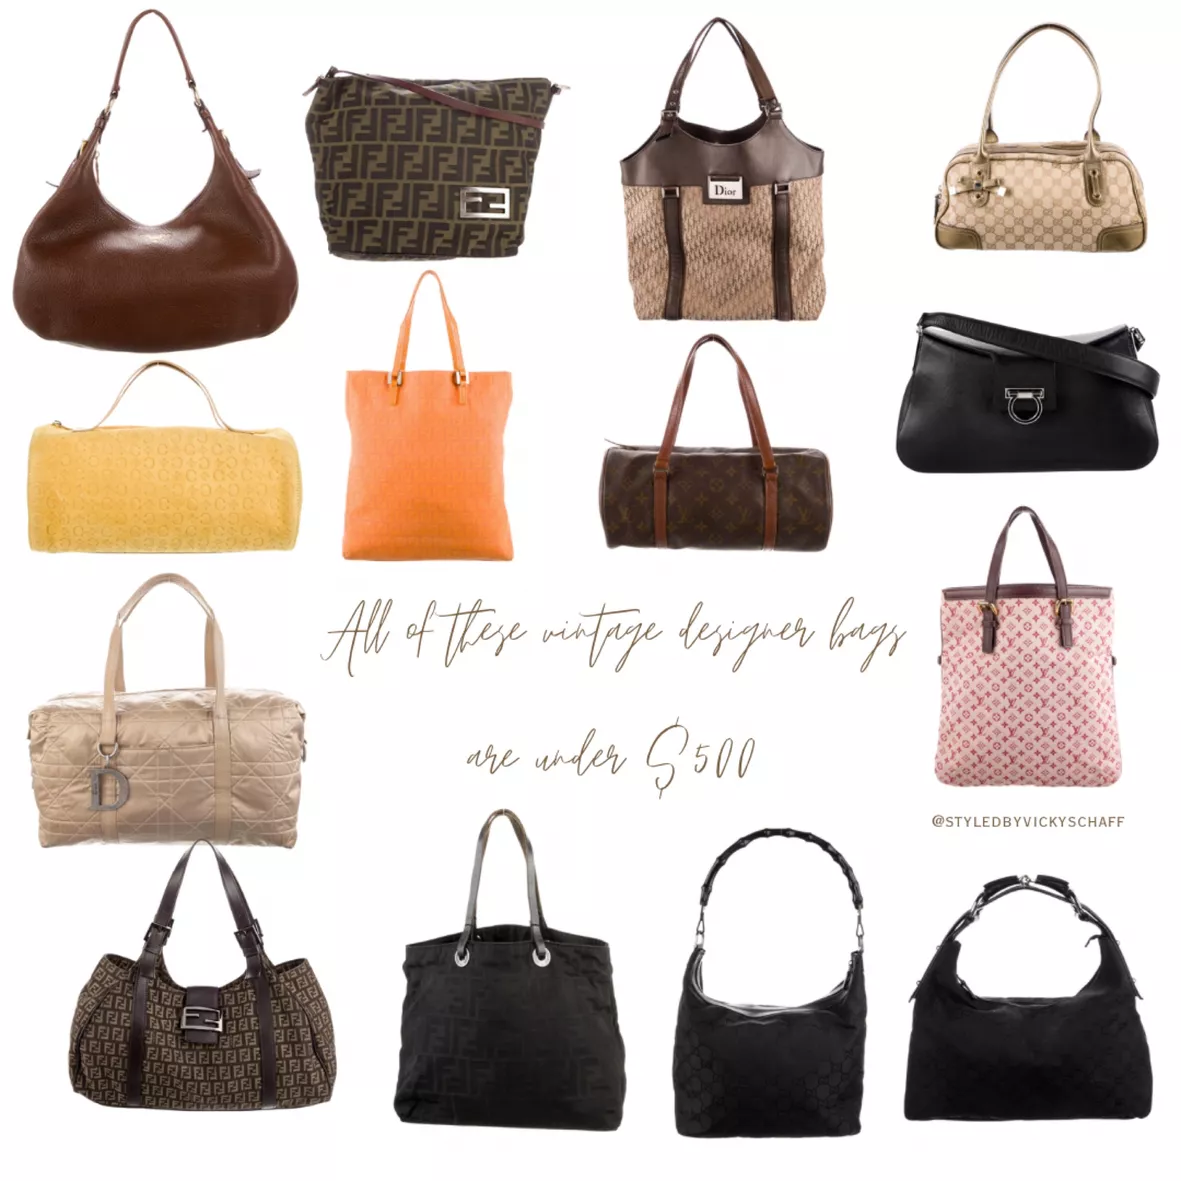 lv bags under 500